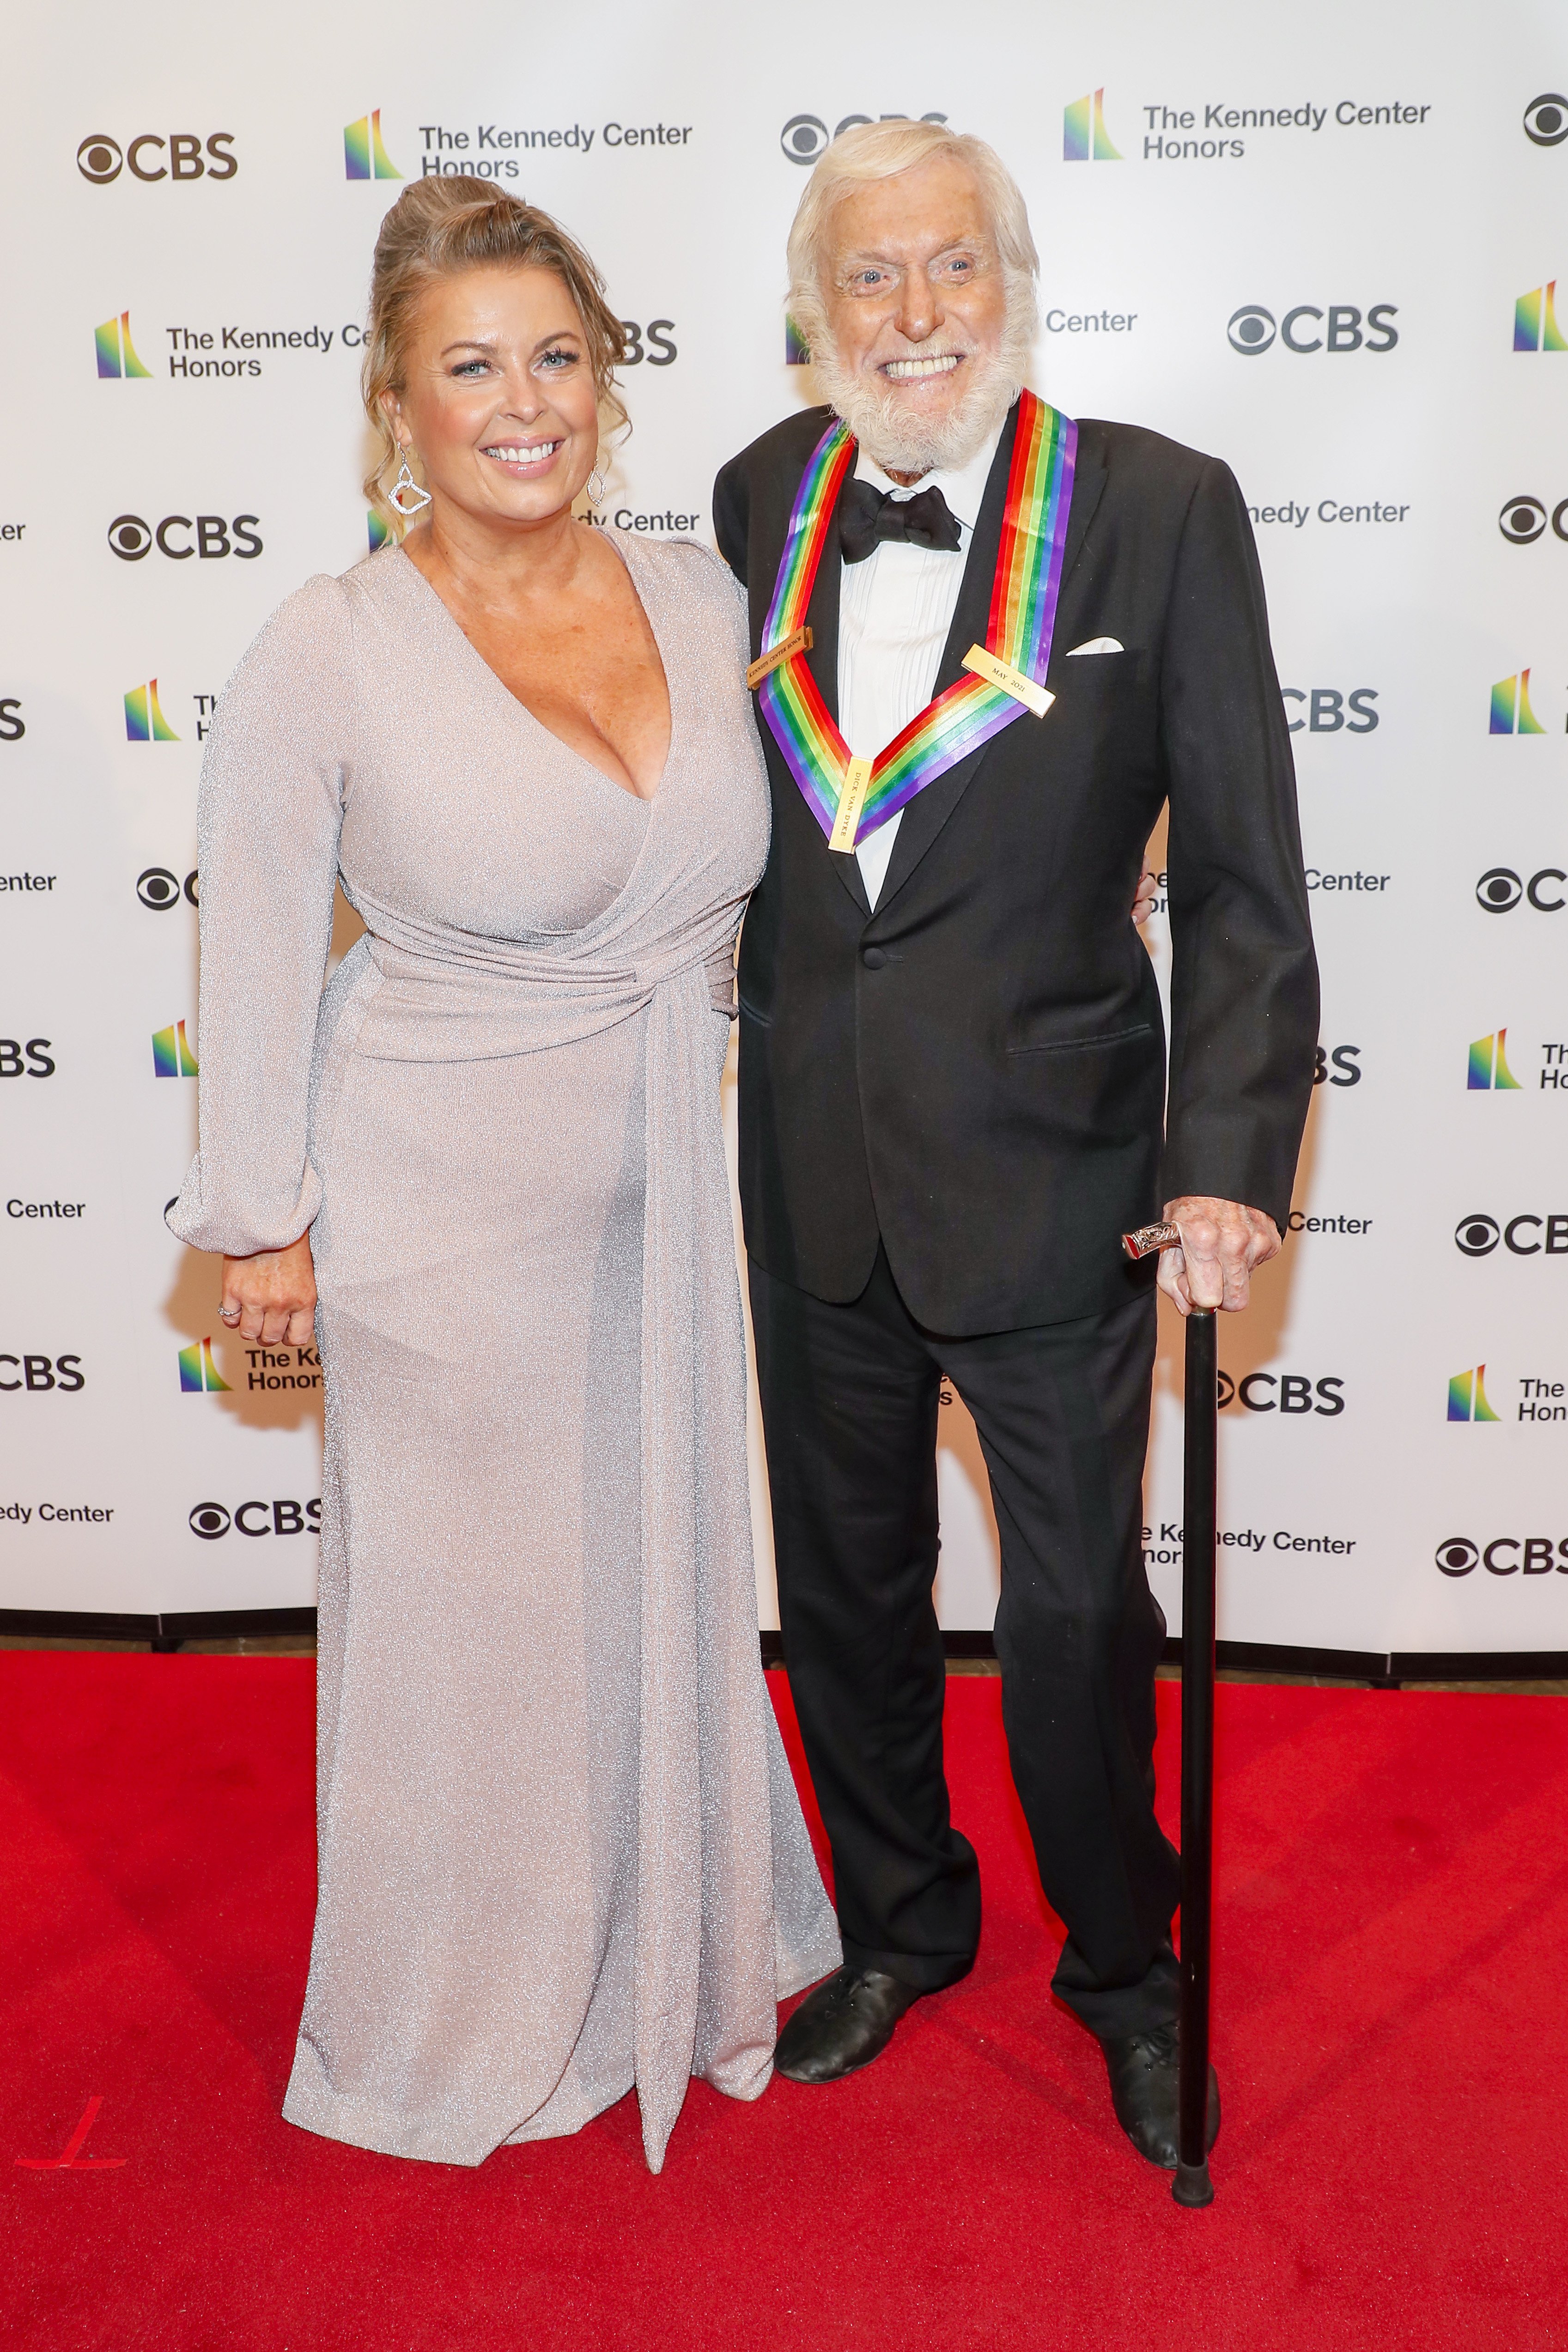 Arlene Silver and Dick Van Dyke attend the 43rd Annual Kennedy Center Honors at The Kennedy Center on May 21, 2021 in Washington, DC. | Source: Getty Images